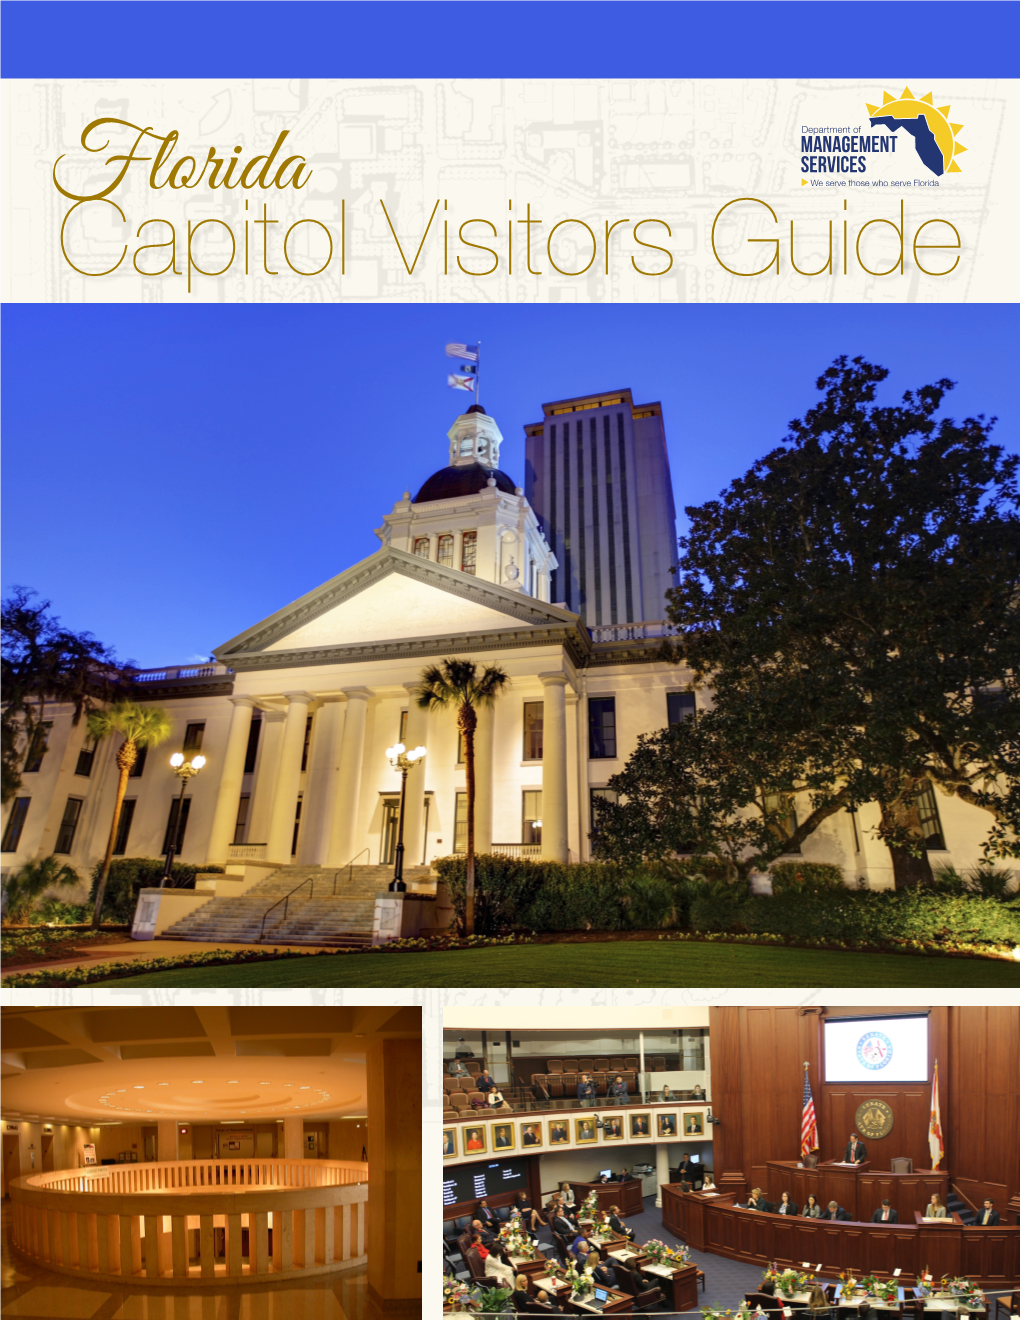 Capitol Visitors Guide Provides Information That Will Help You Get the Most out of Your Visit